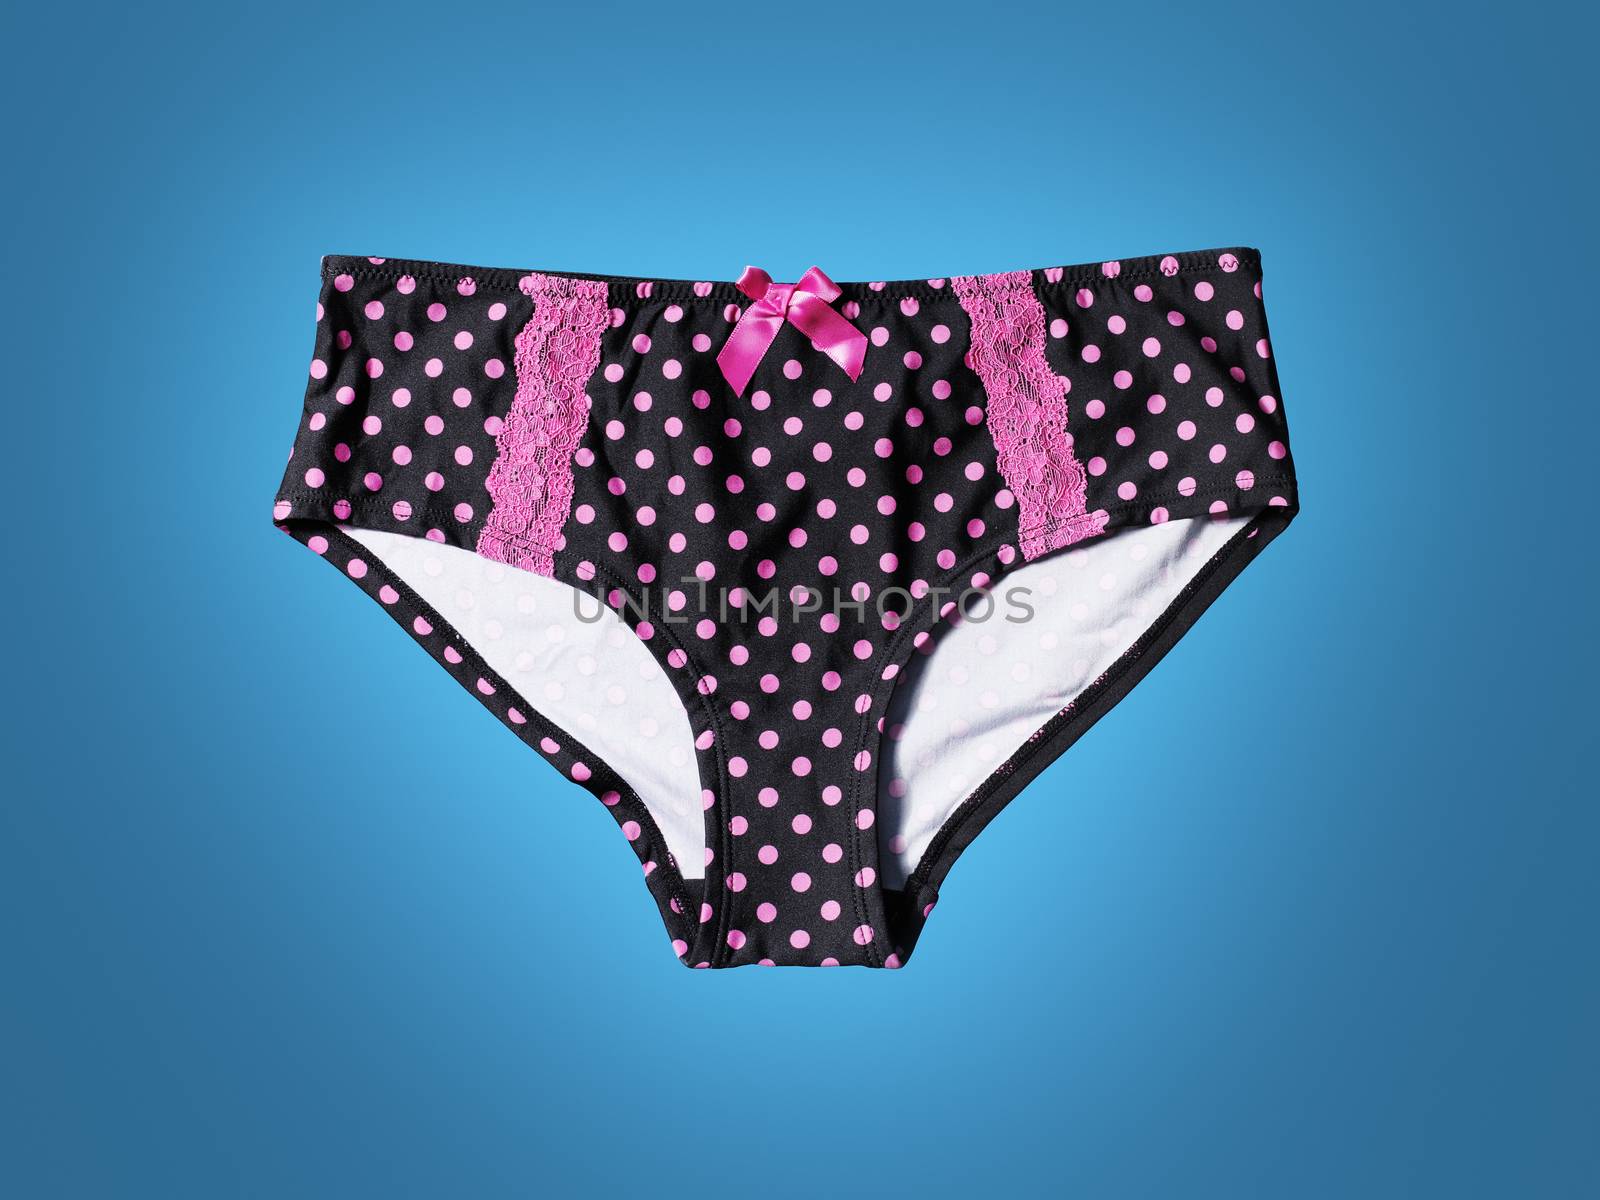 Women's black panties with pink polka dots on blue background.